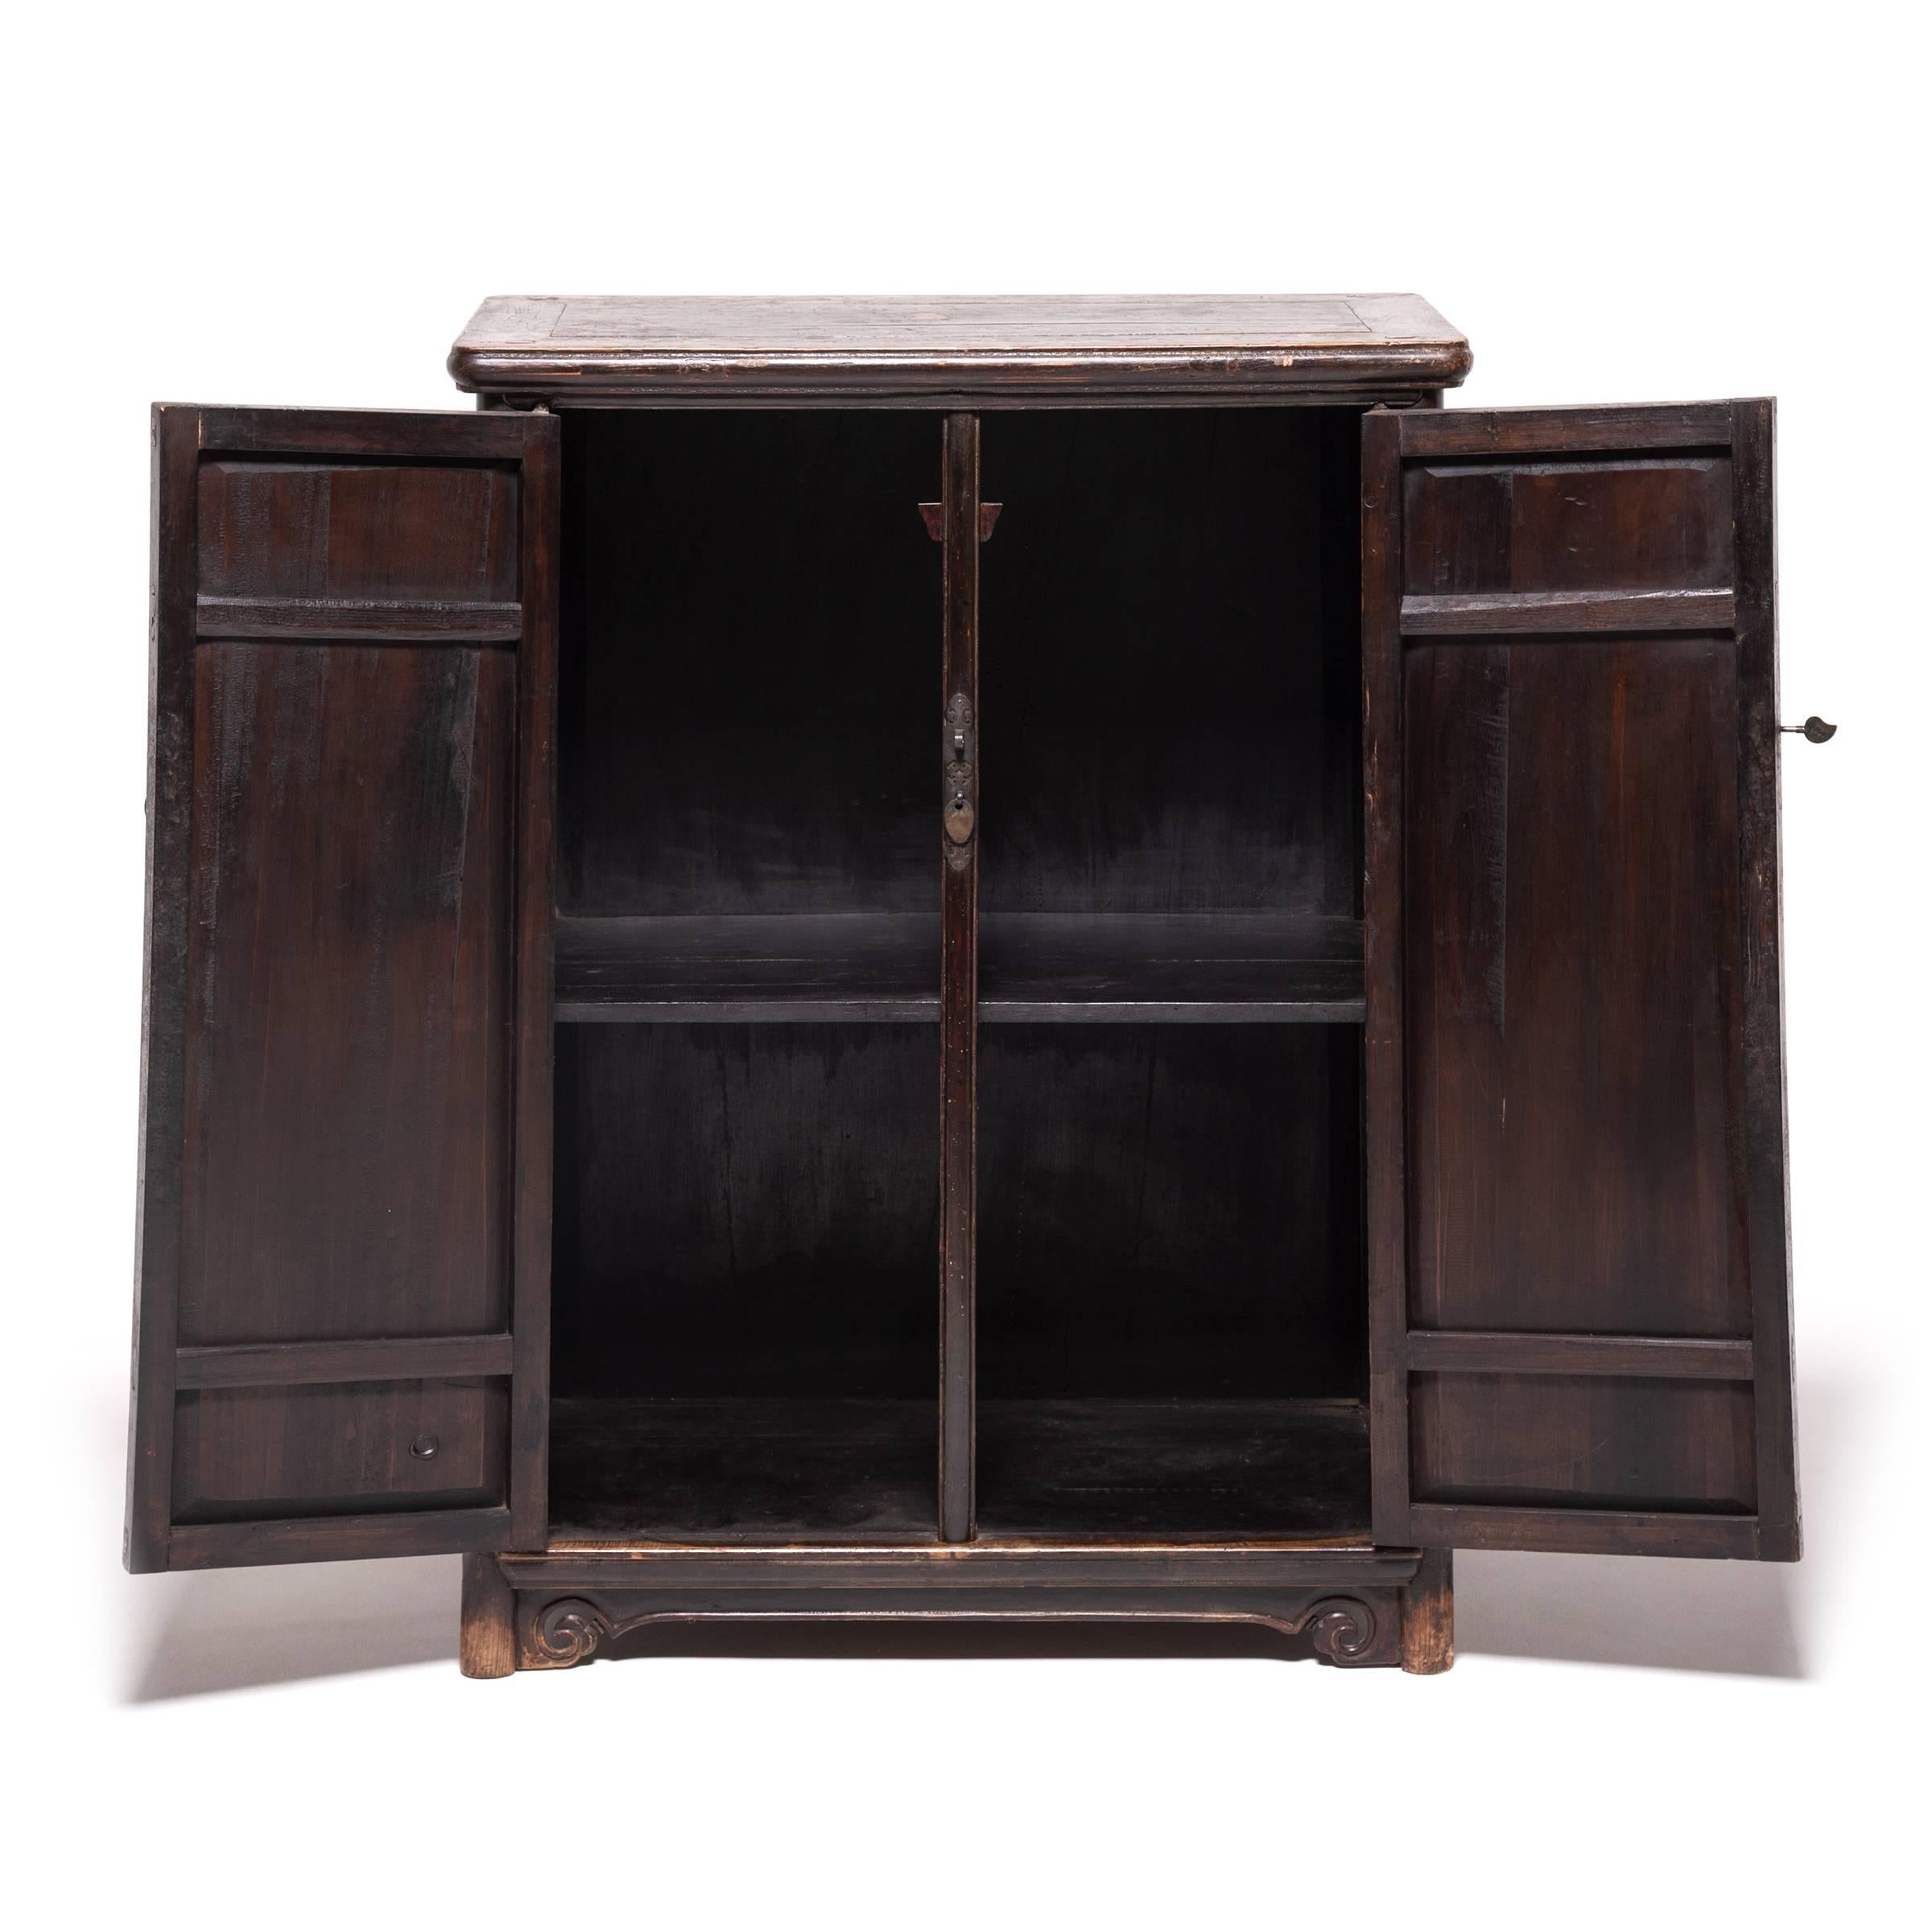 Inspired by the clean simplicity of Ming-dynasty furniture, this tapered cabinet showcases the rich warmth of natural elmwood. Simply accented with rounded corners and subtle cloud scrolls at the feet, the cabinet features brass hardware in the form